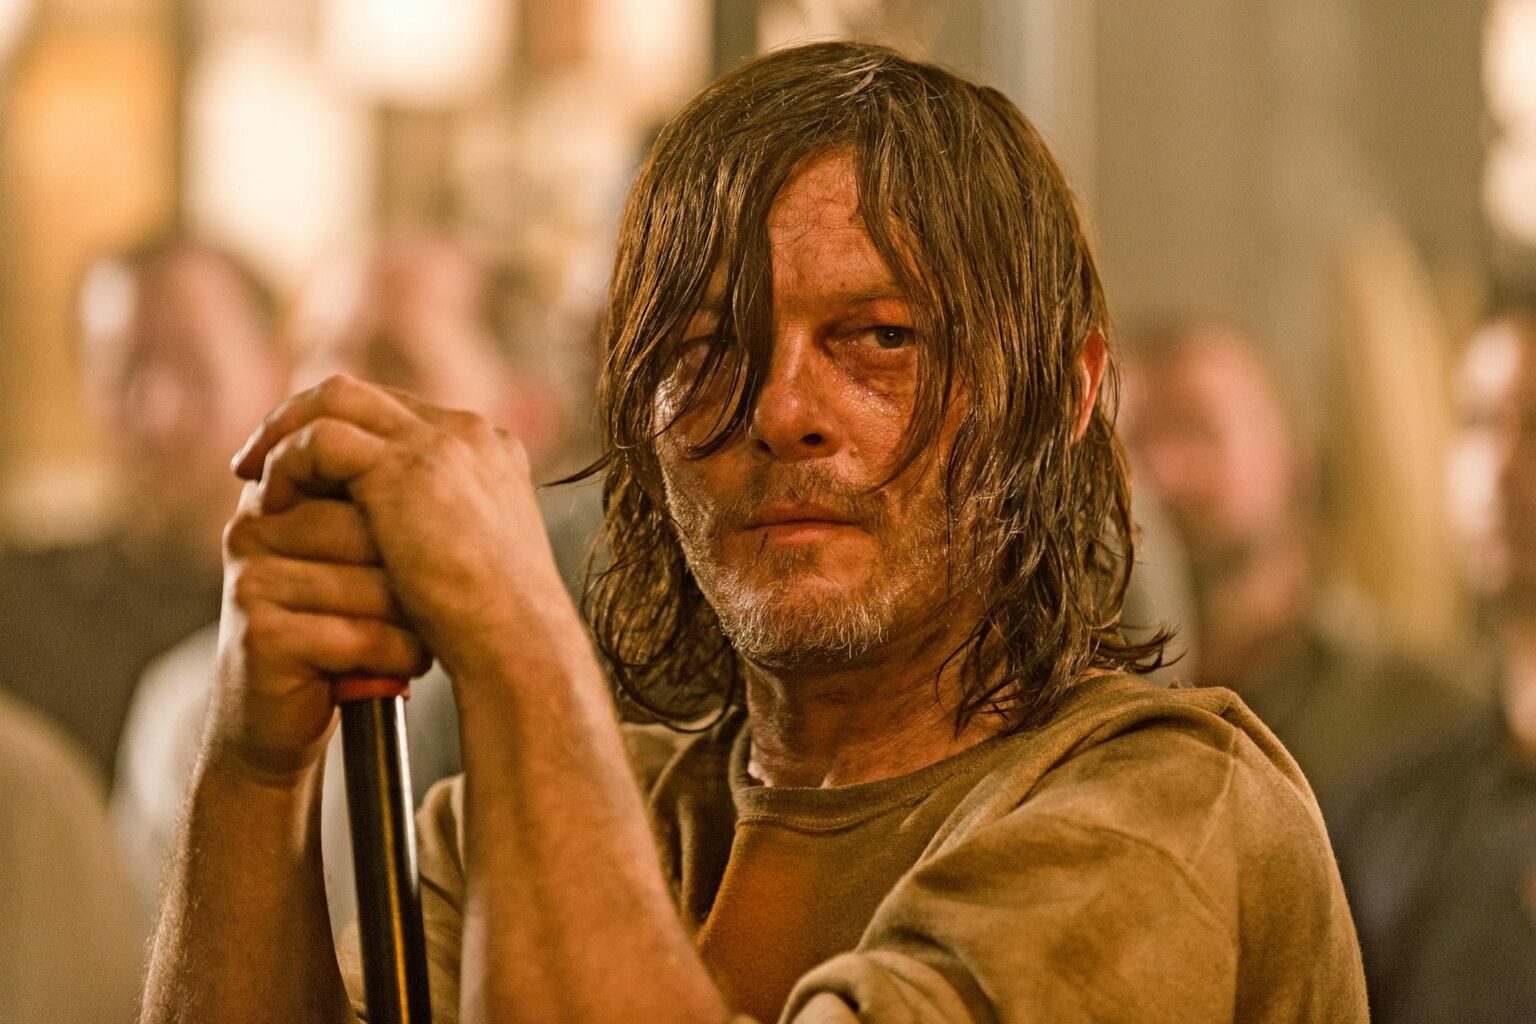 Norman Reedus Net Worth Is This Artist Very Rich?